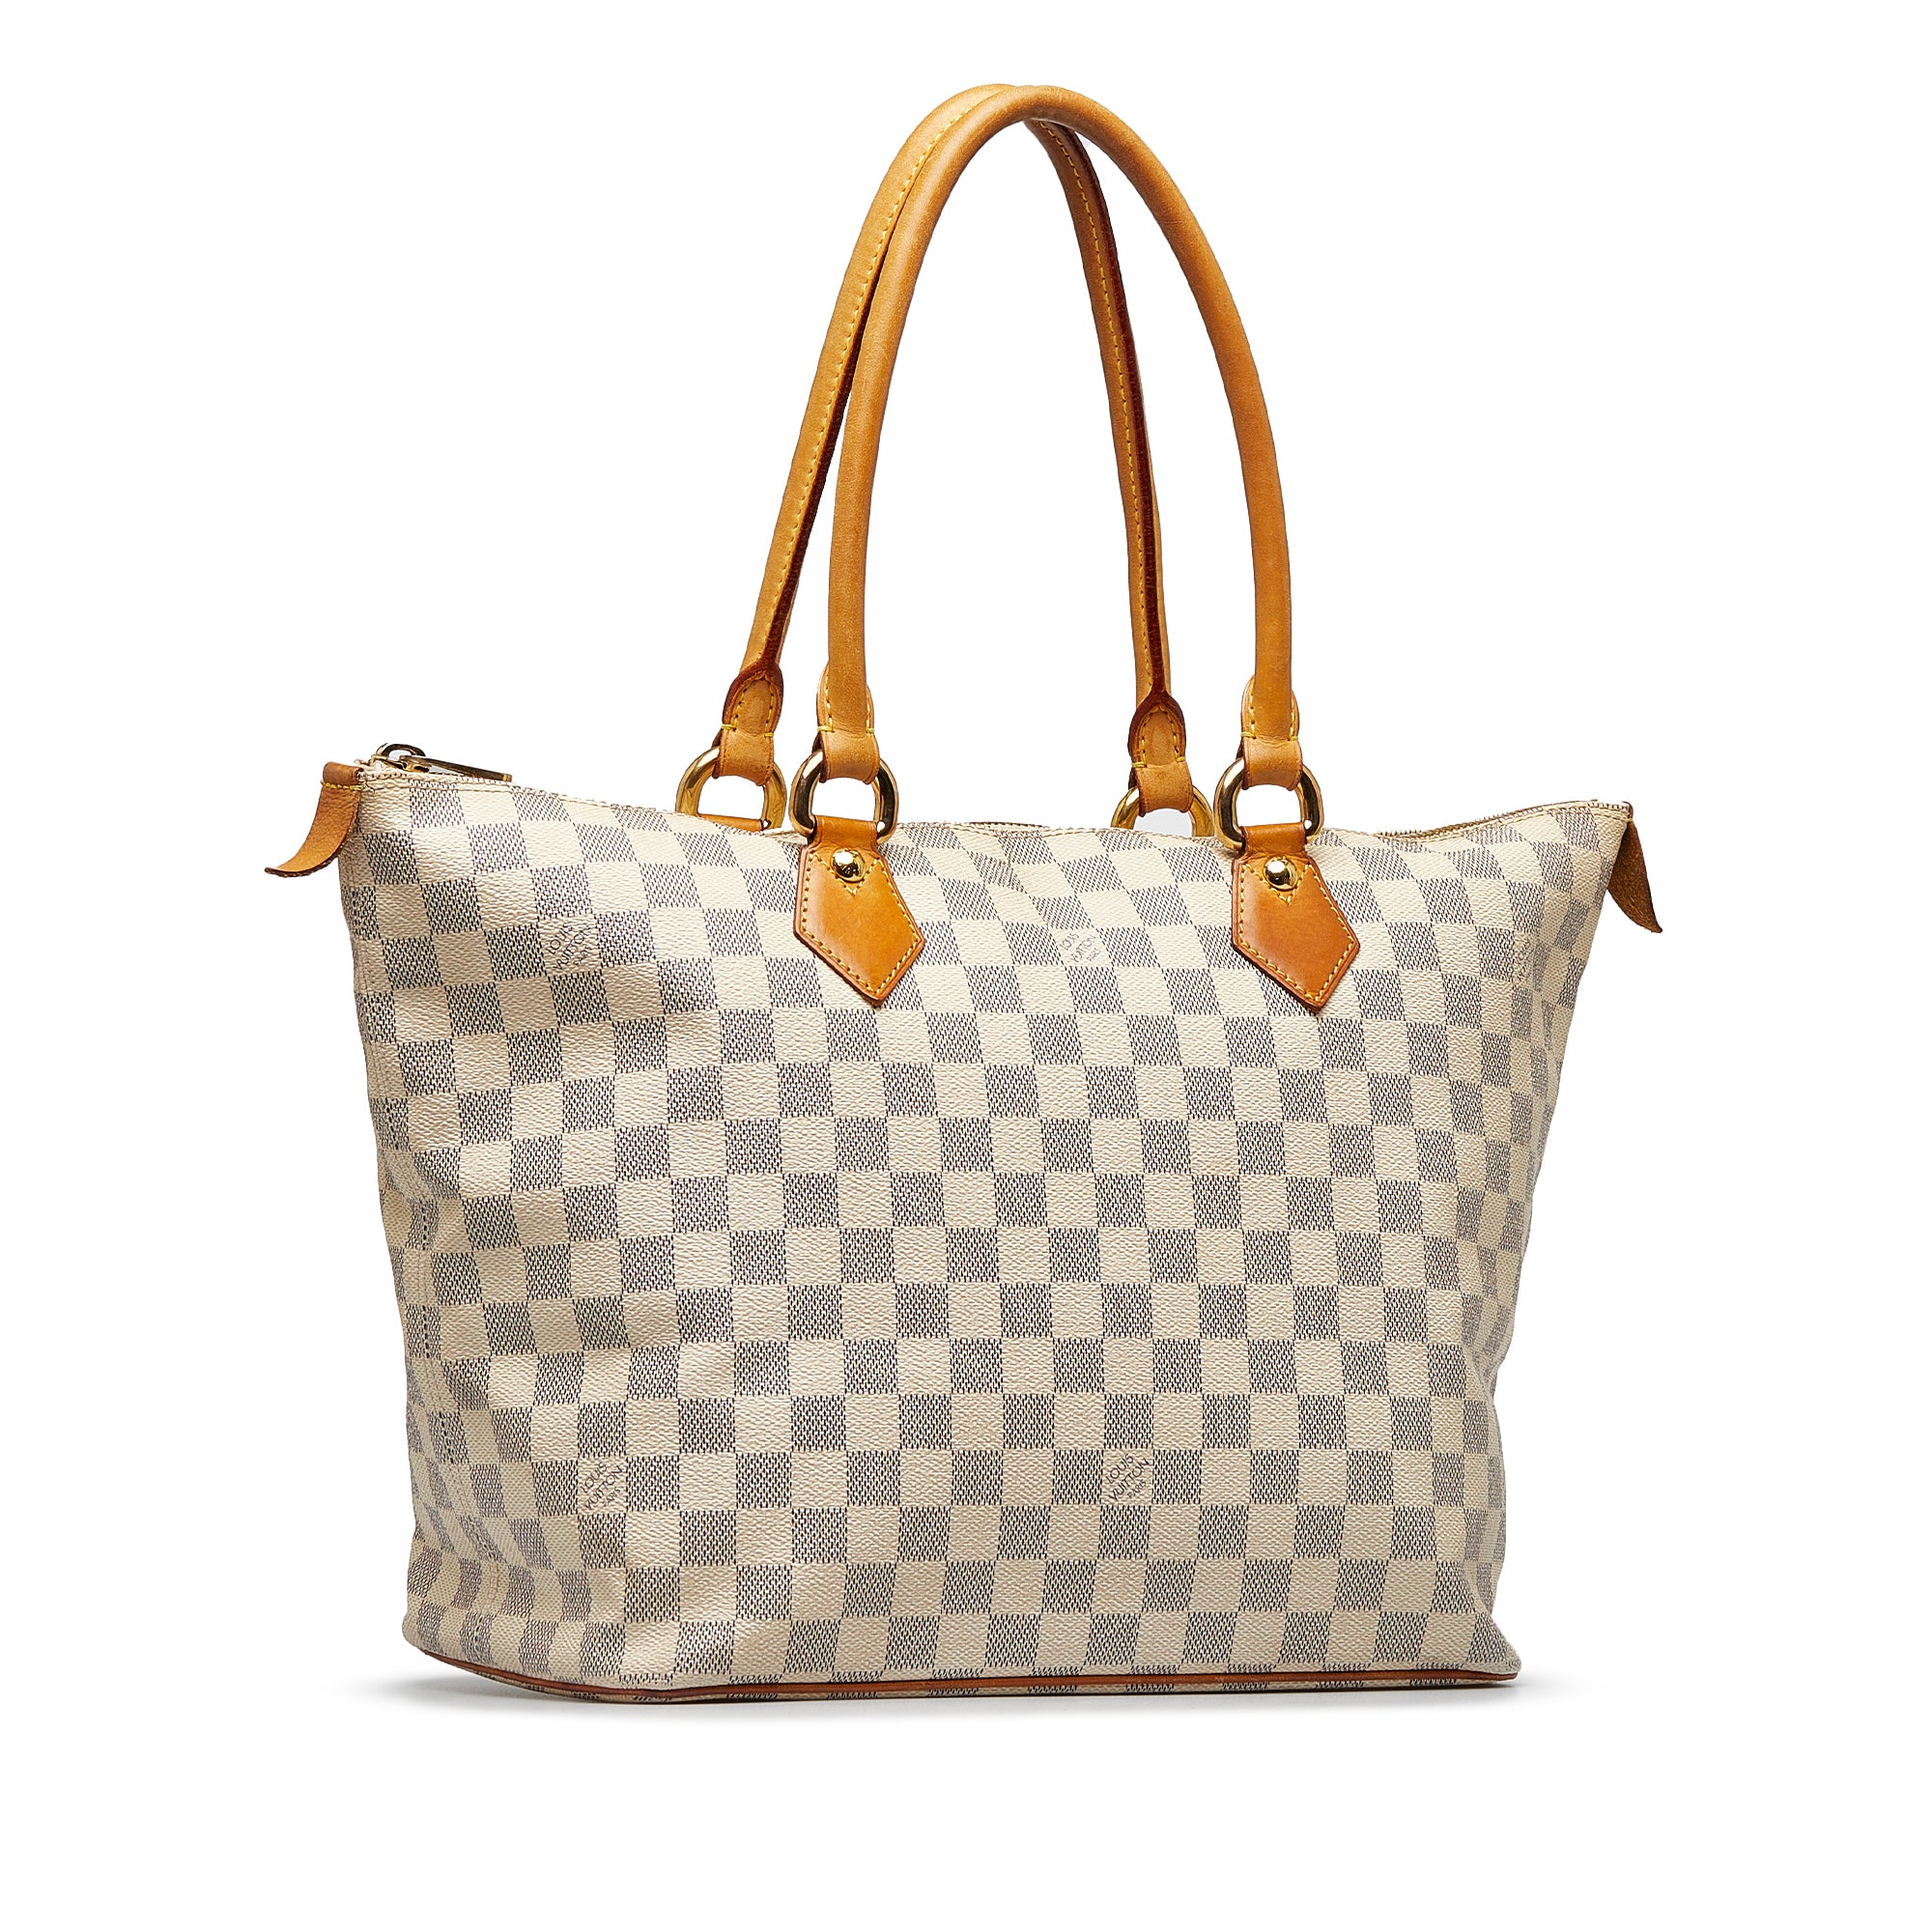 LOUIS VUITTON SALEYA MM DAMIER AZURE, What Fits In My Bag, Review